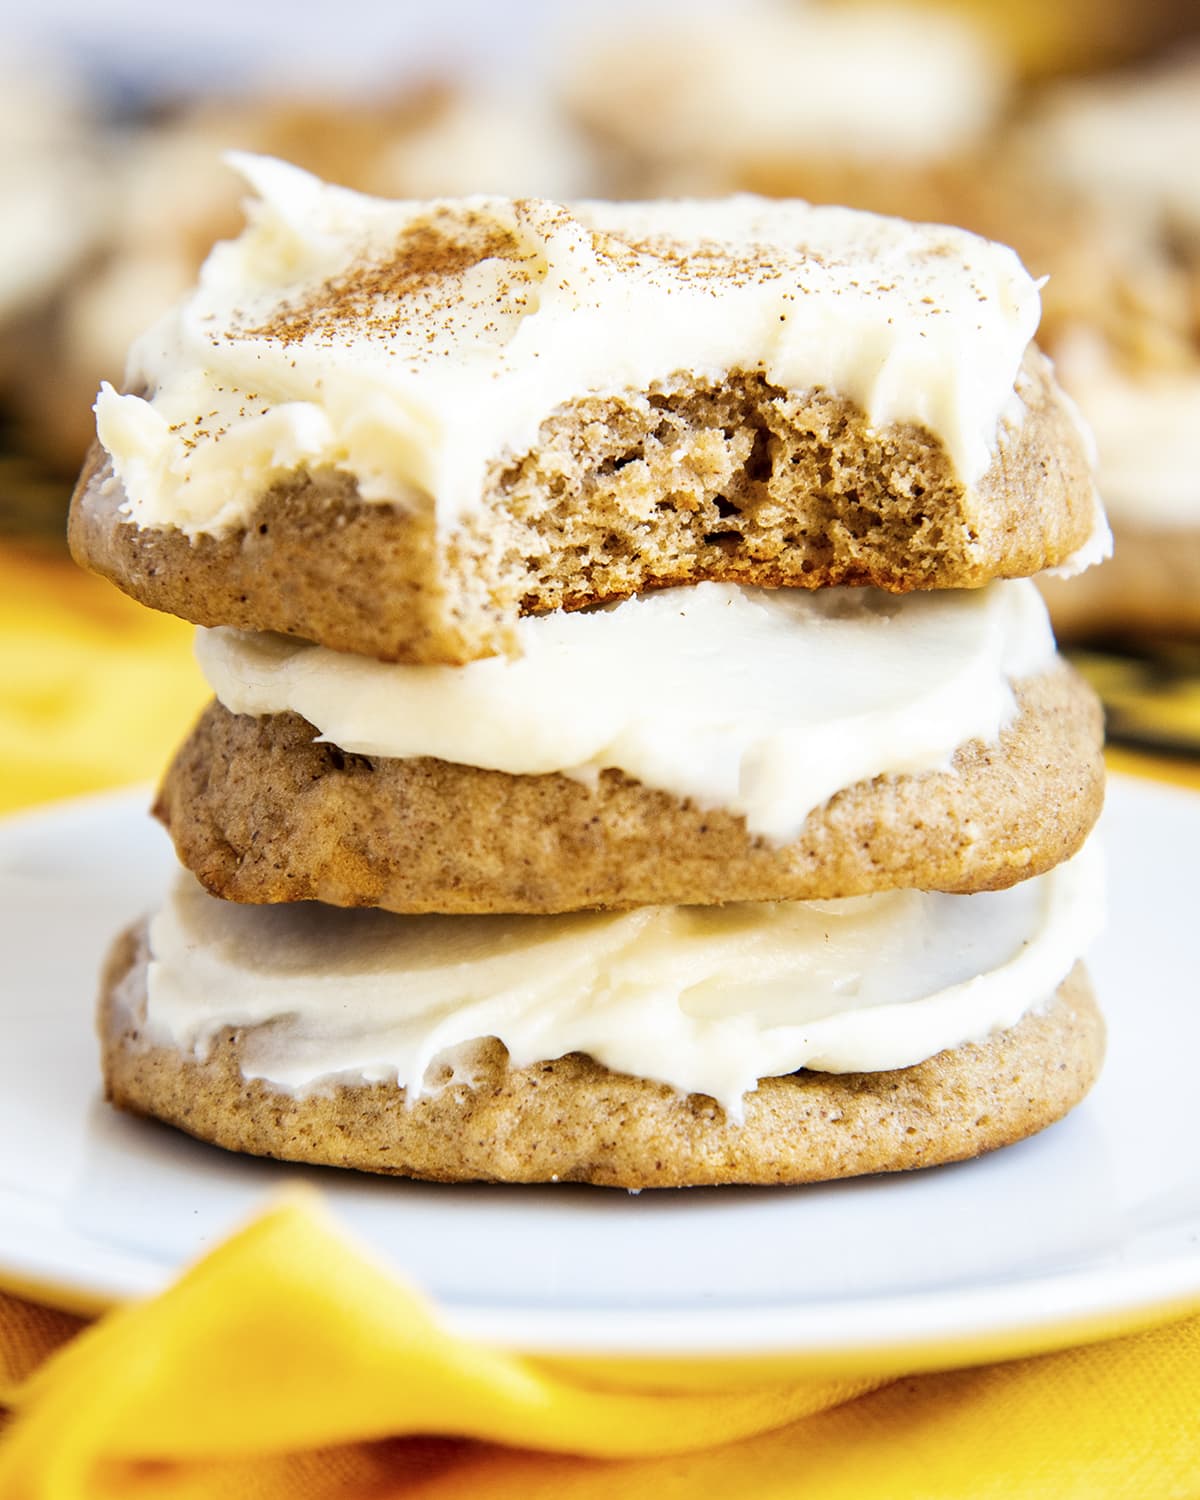 A stack of three banana bread cookies, the top cookie has a bite taken out of it.